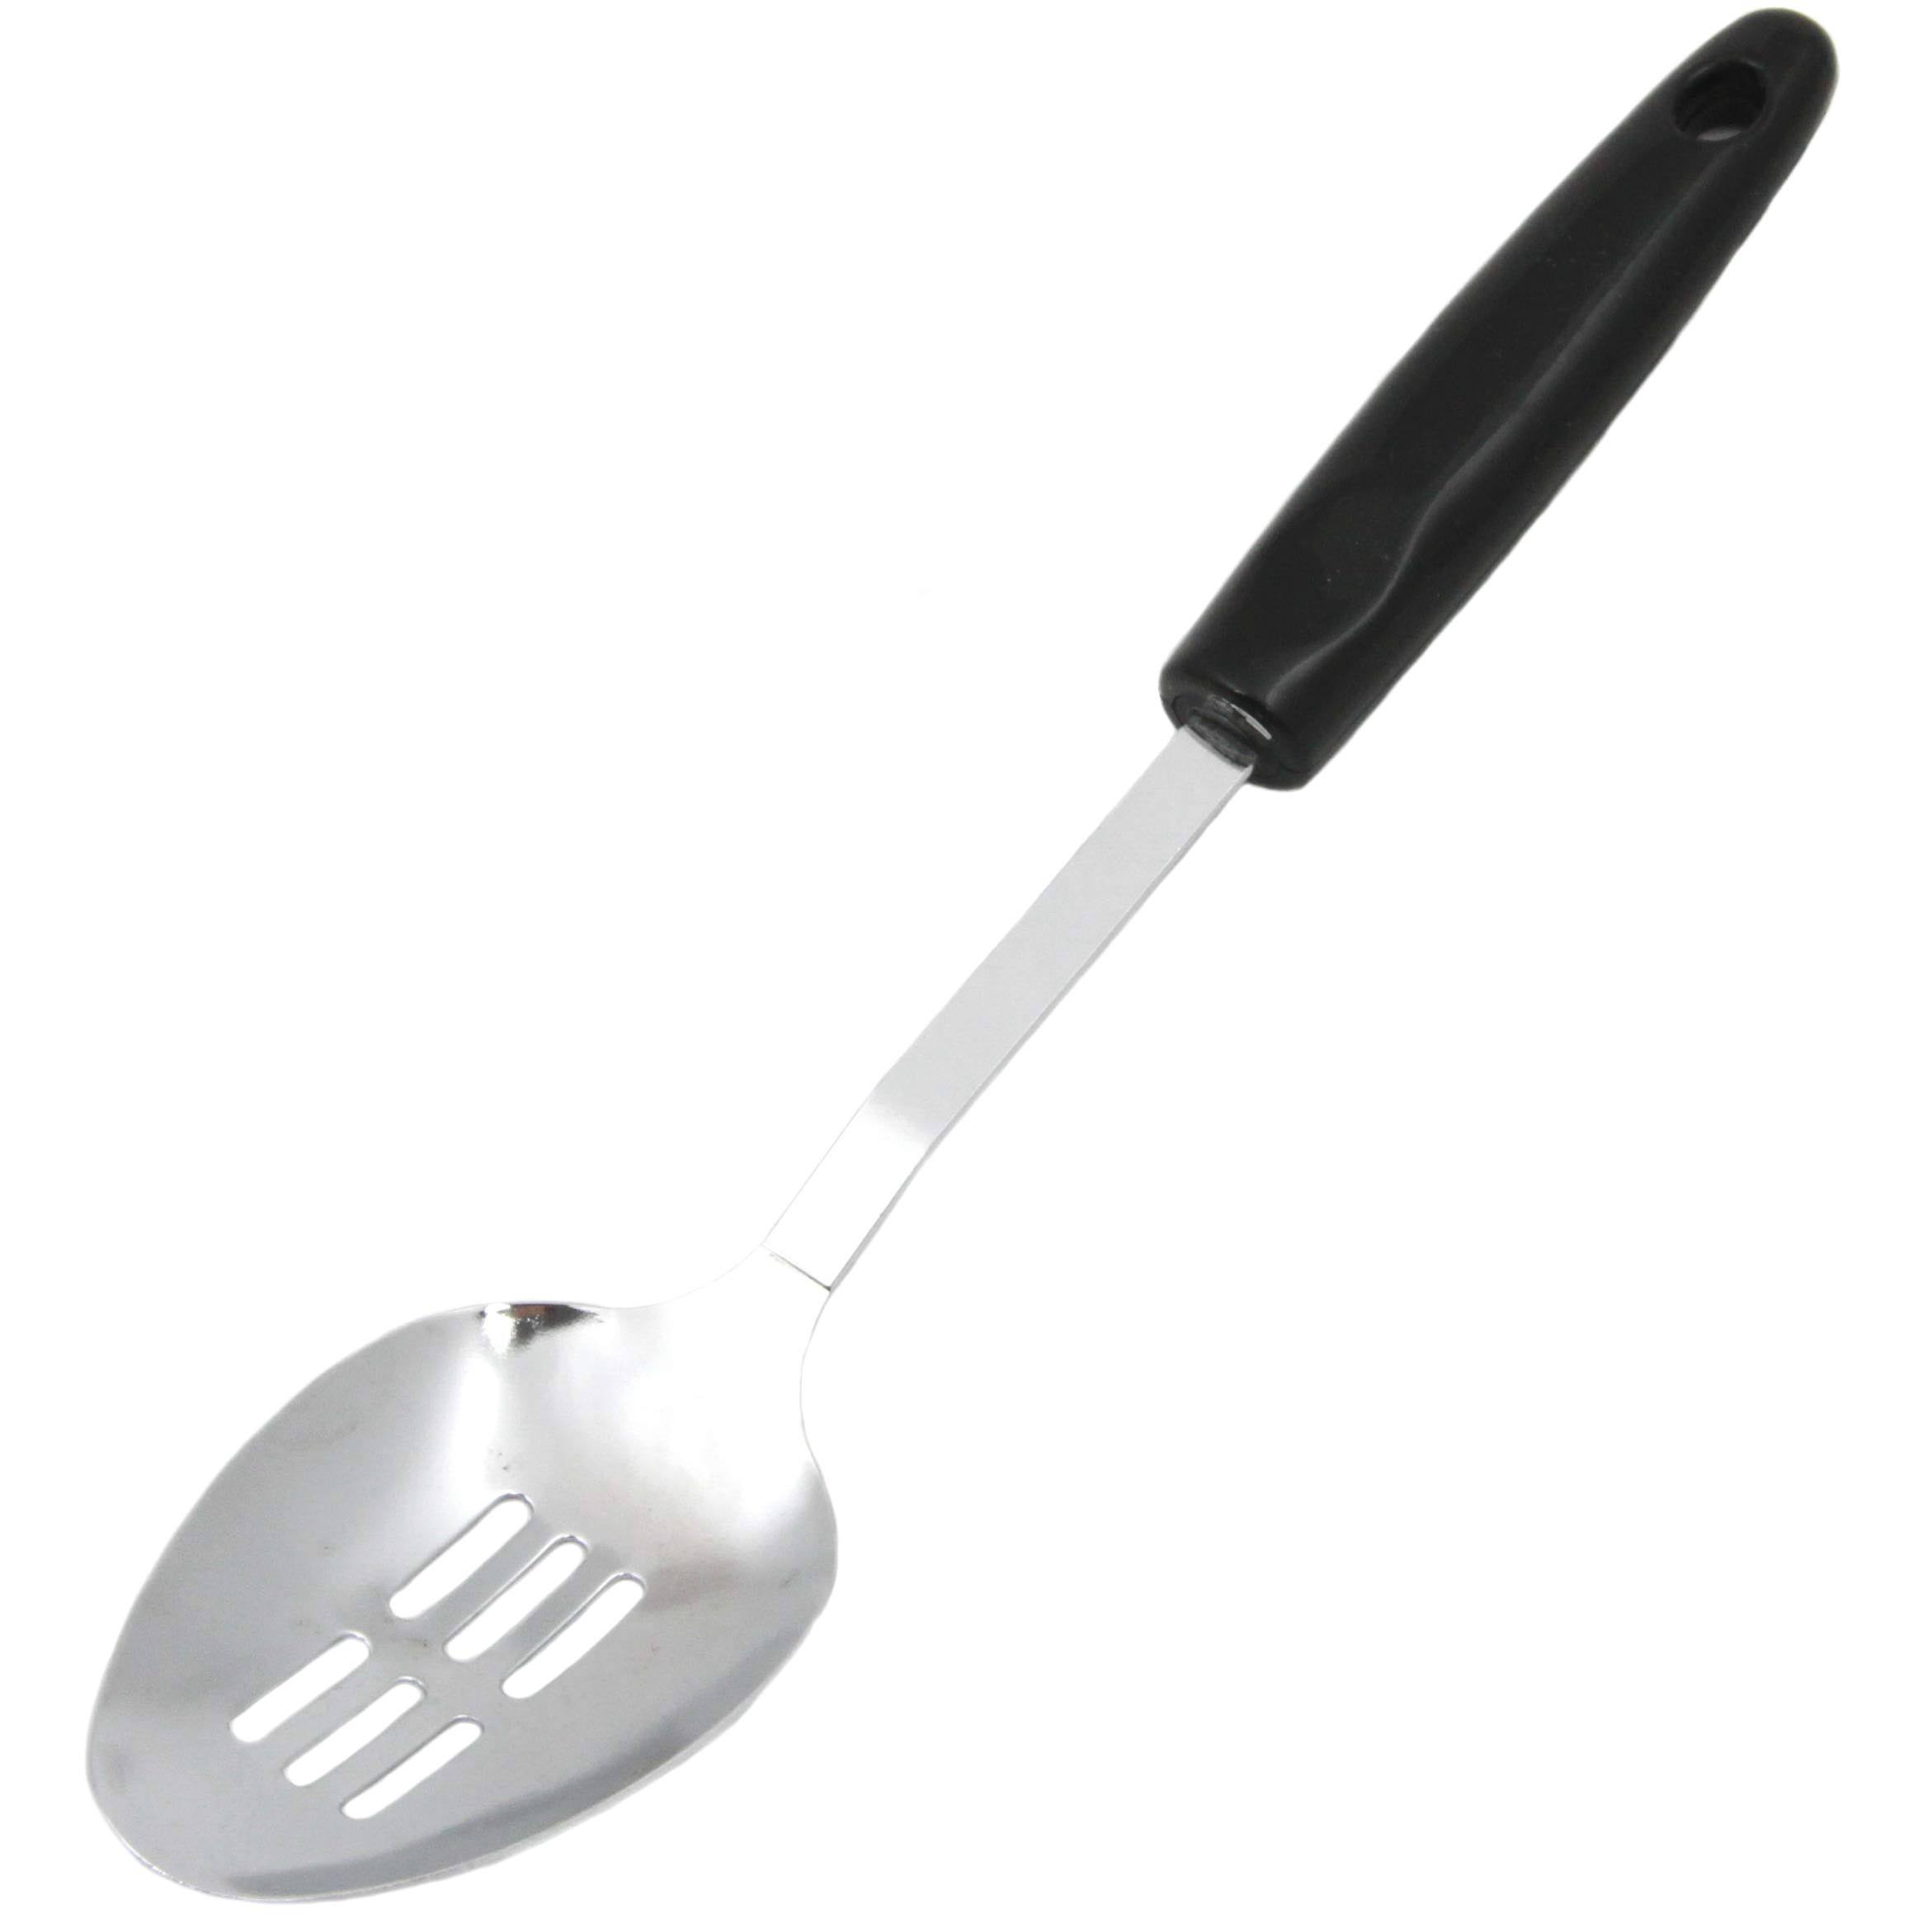 Chef Craft Slotted Spoon - Chrome / Black